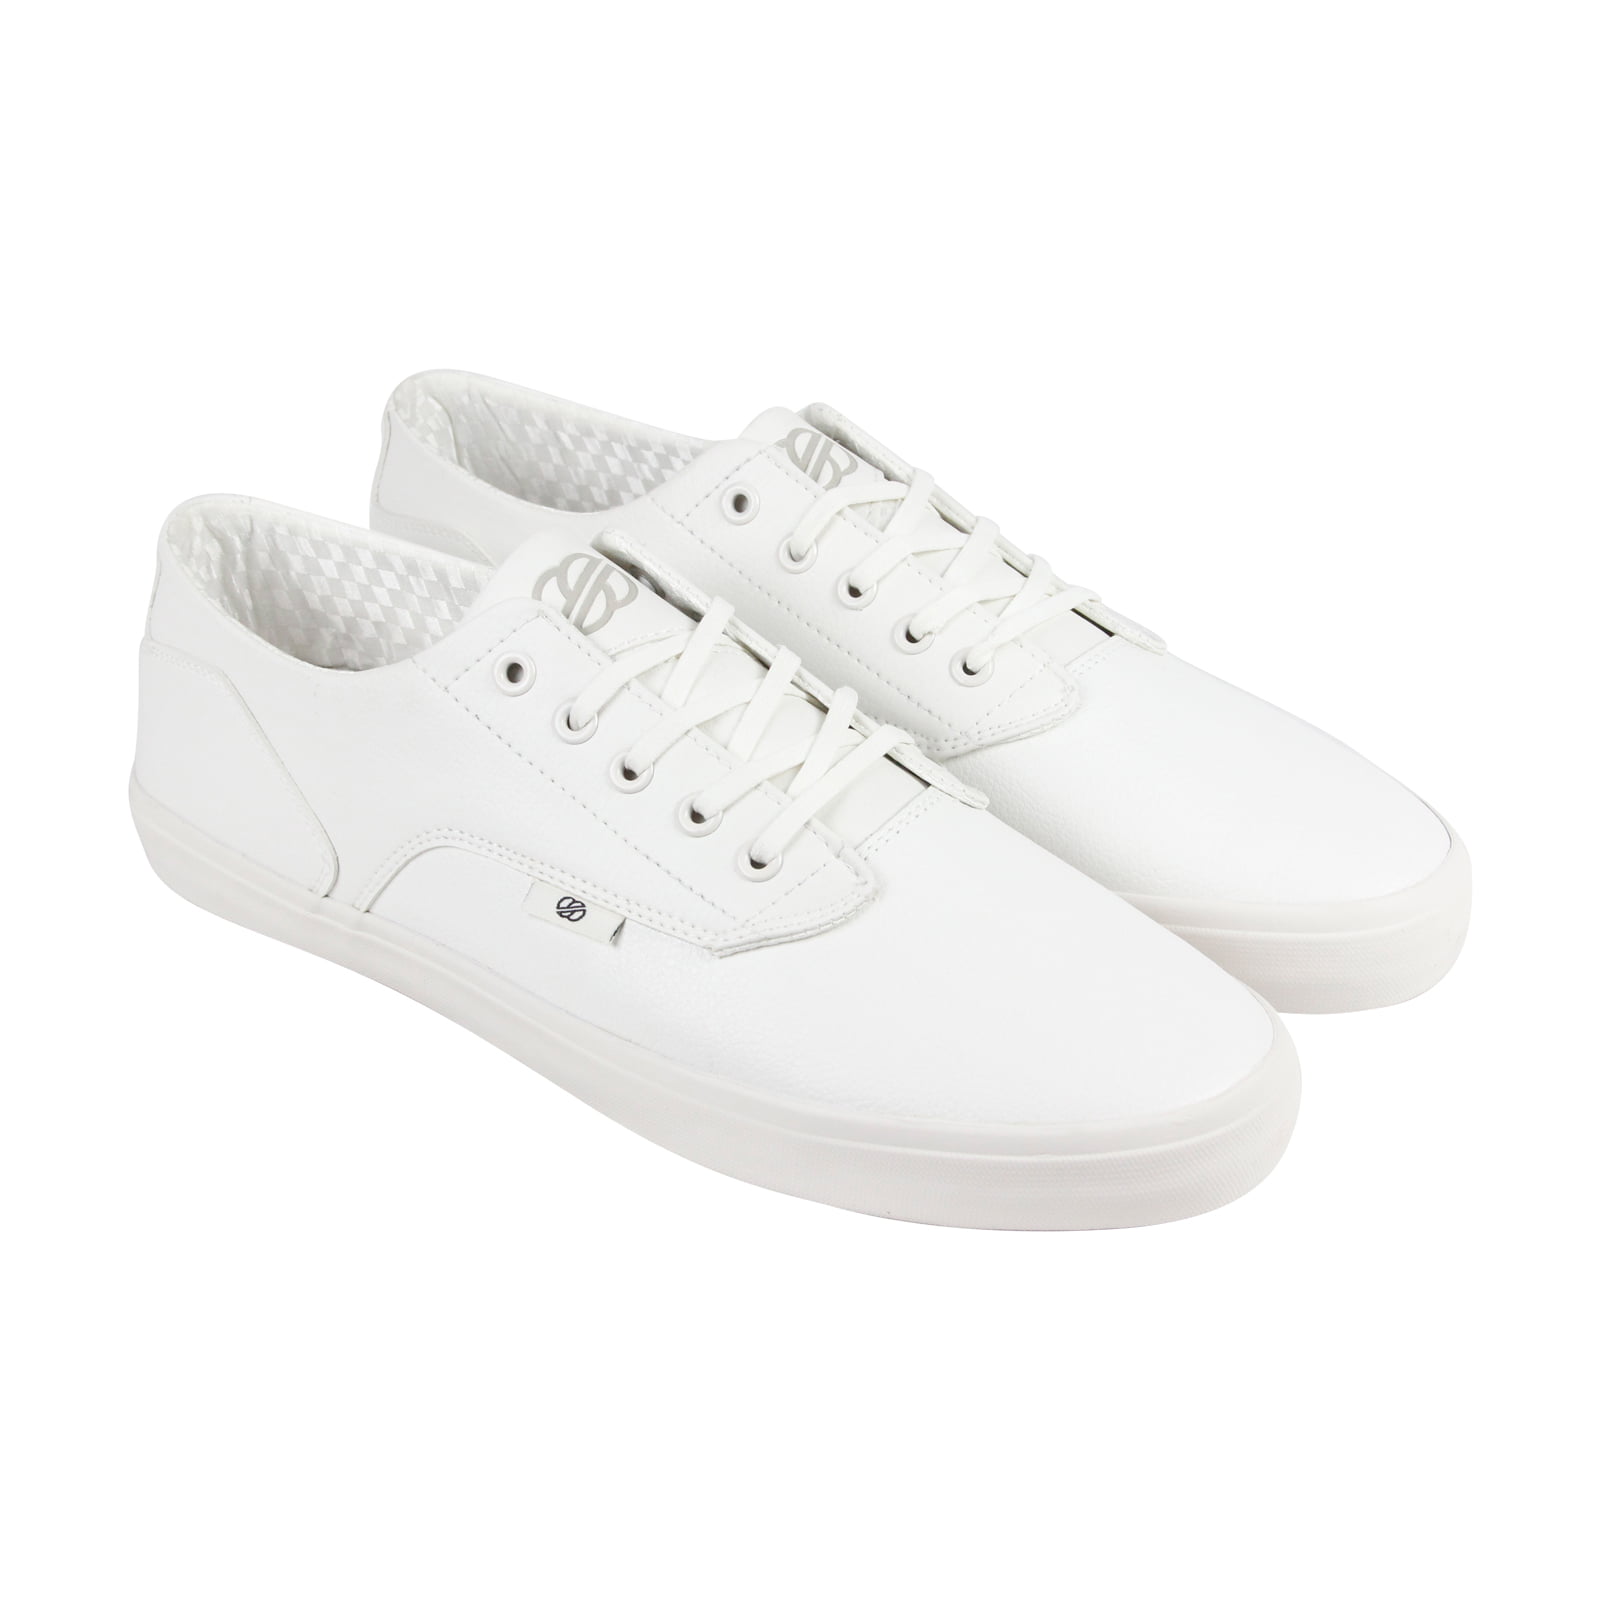 Radii Axel Mens White Leather Lace 